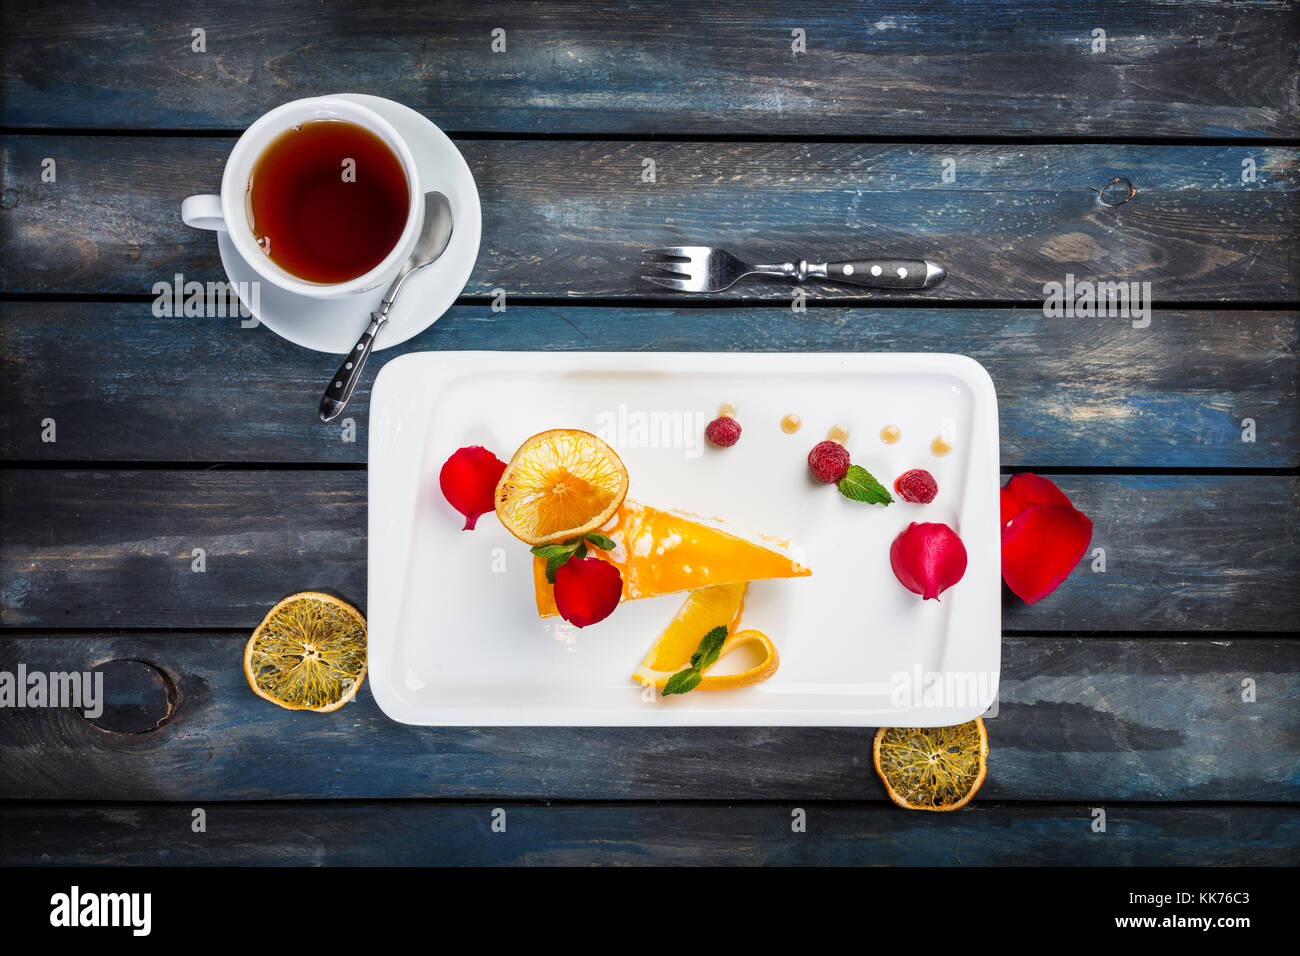 Orange cake with a cup of tea fresh raspberries on a white plate with rose petals. Top view. Beautiful wooden background. Stock Photo